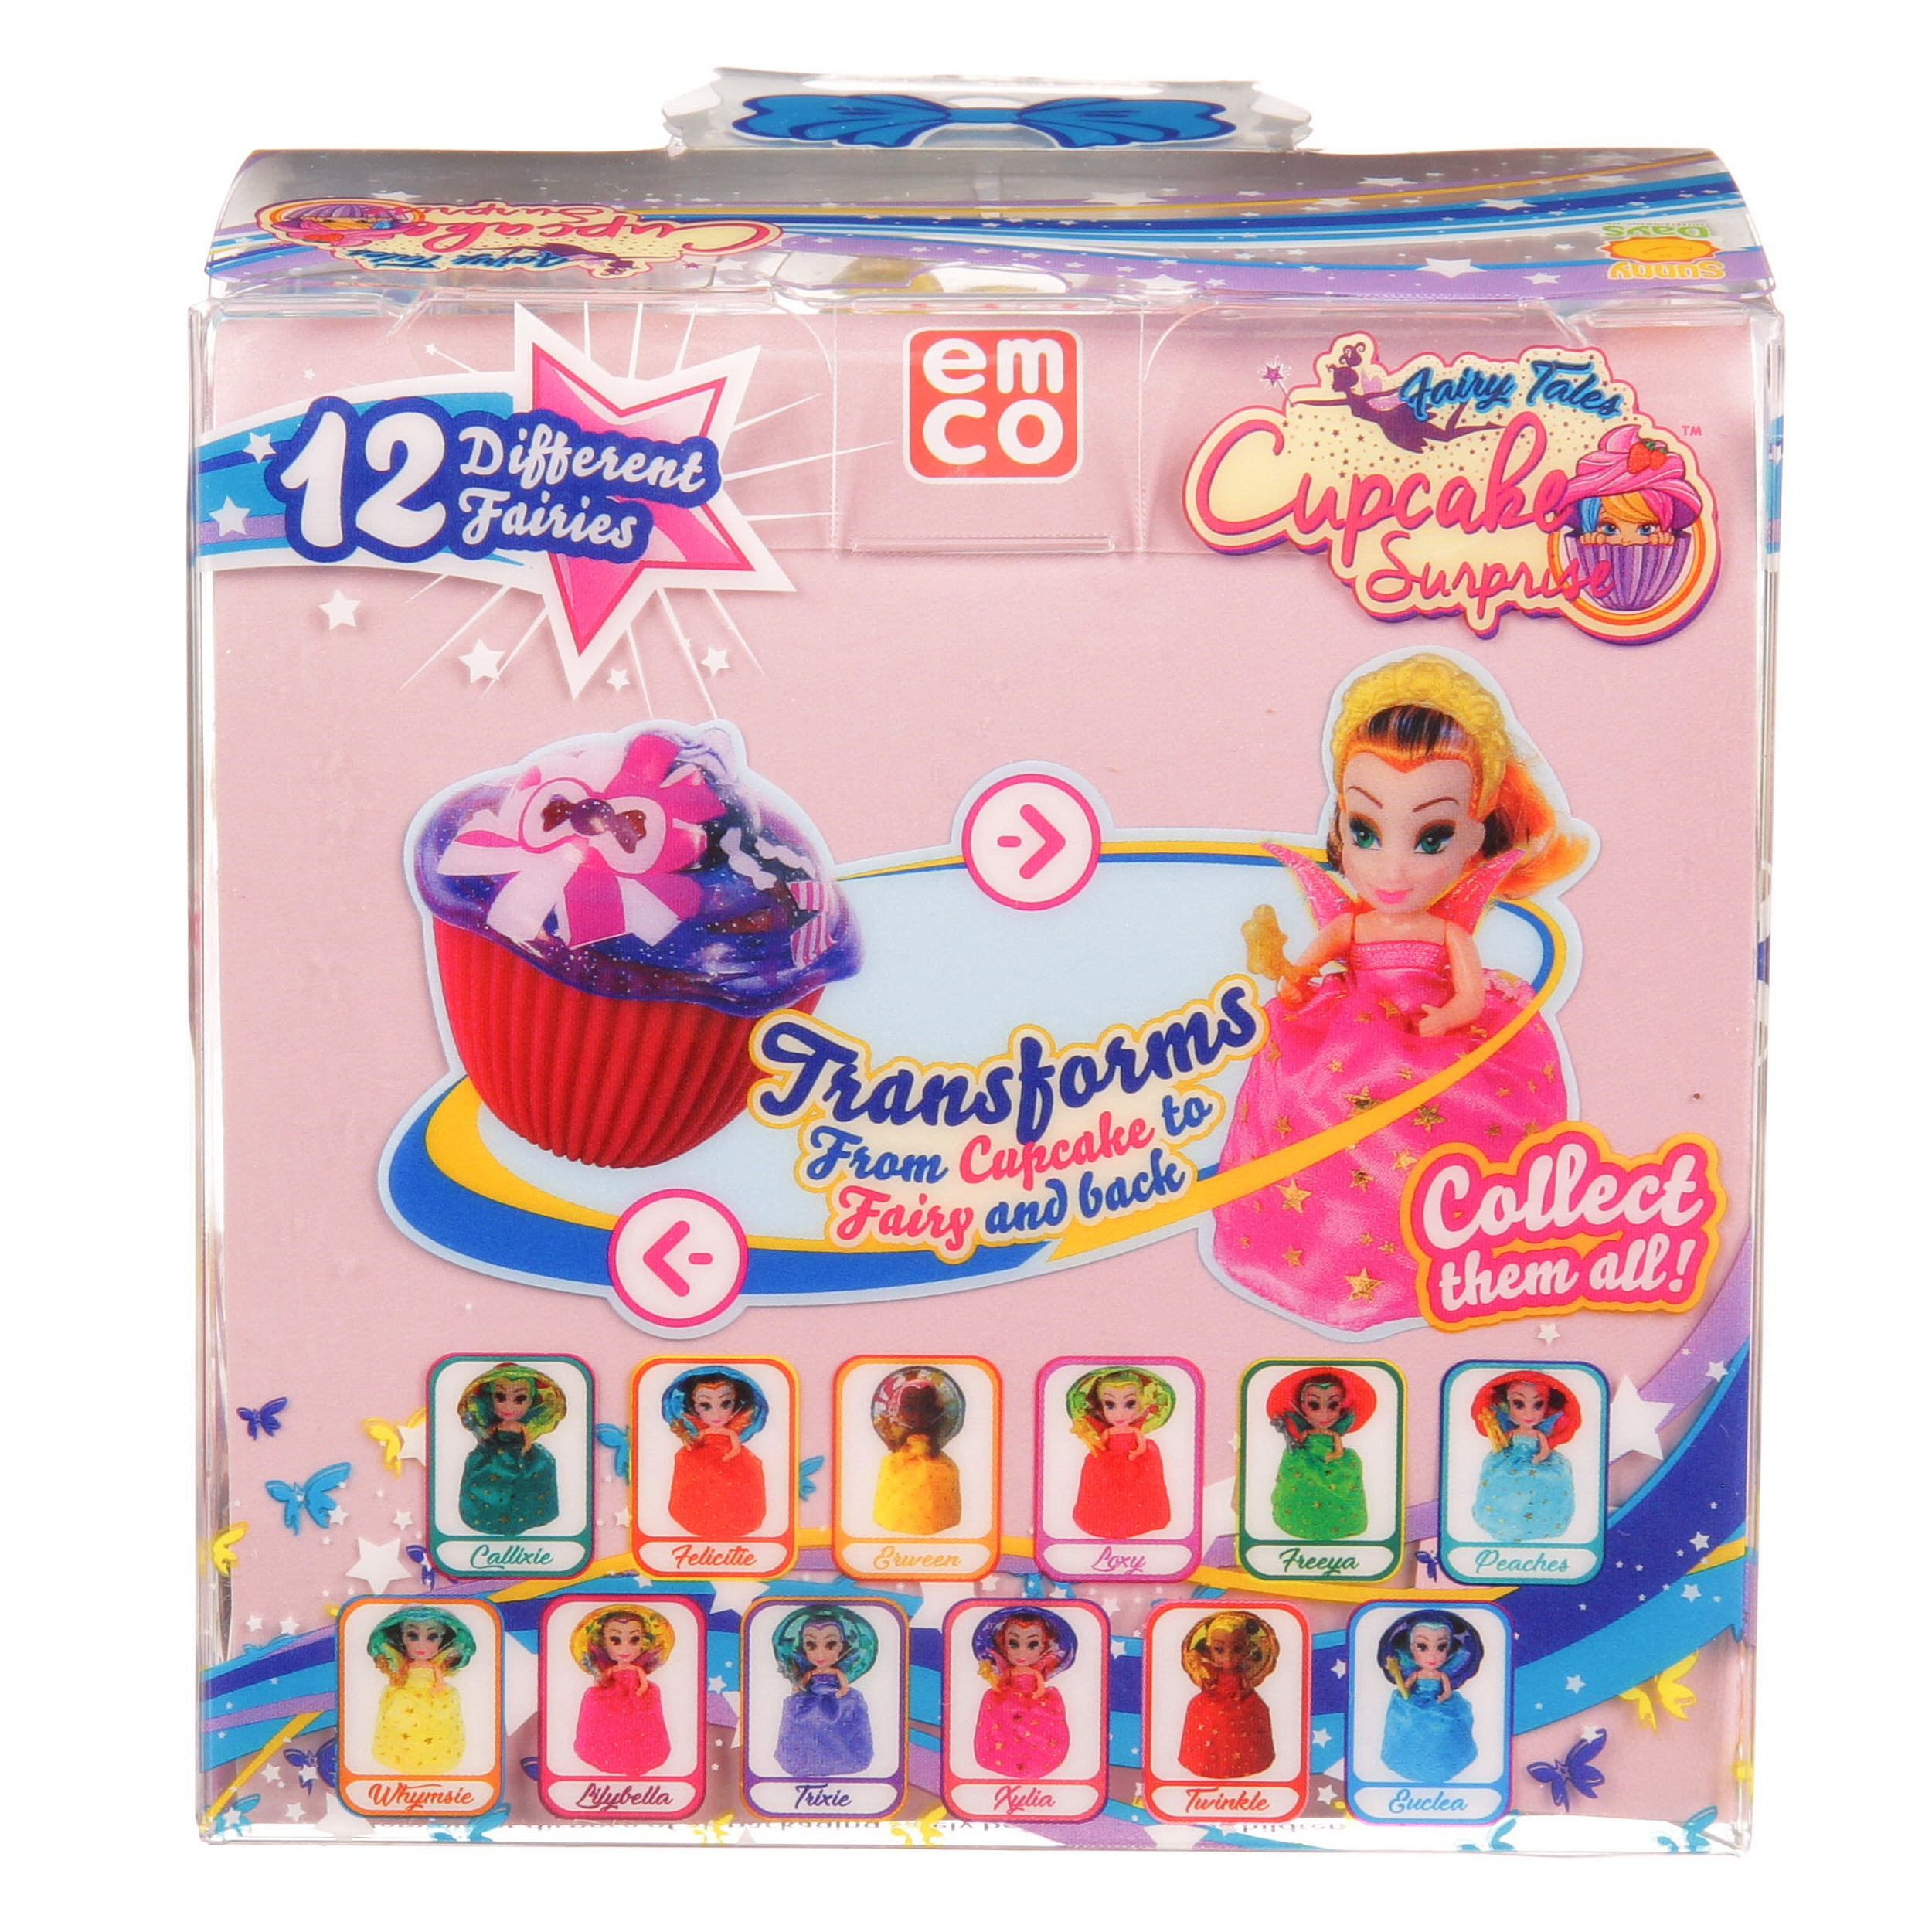 Color & Style May Var Cupcake Surprise Scented Princess Doll-Fairy Tale Edition 